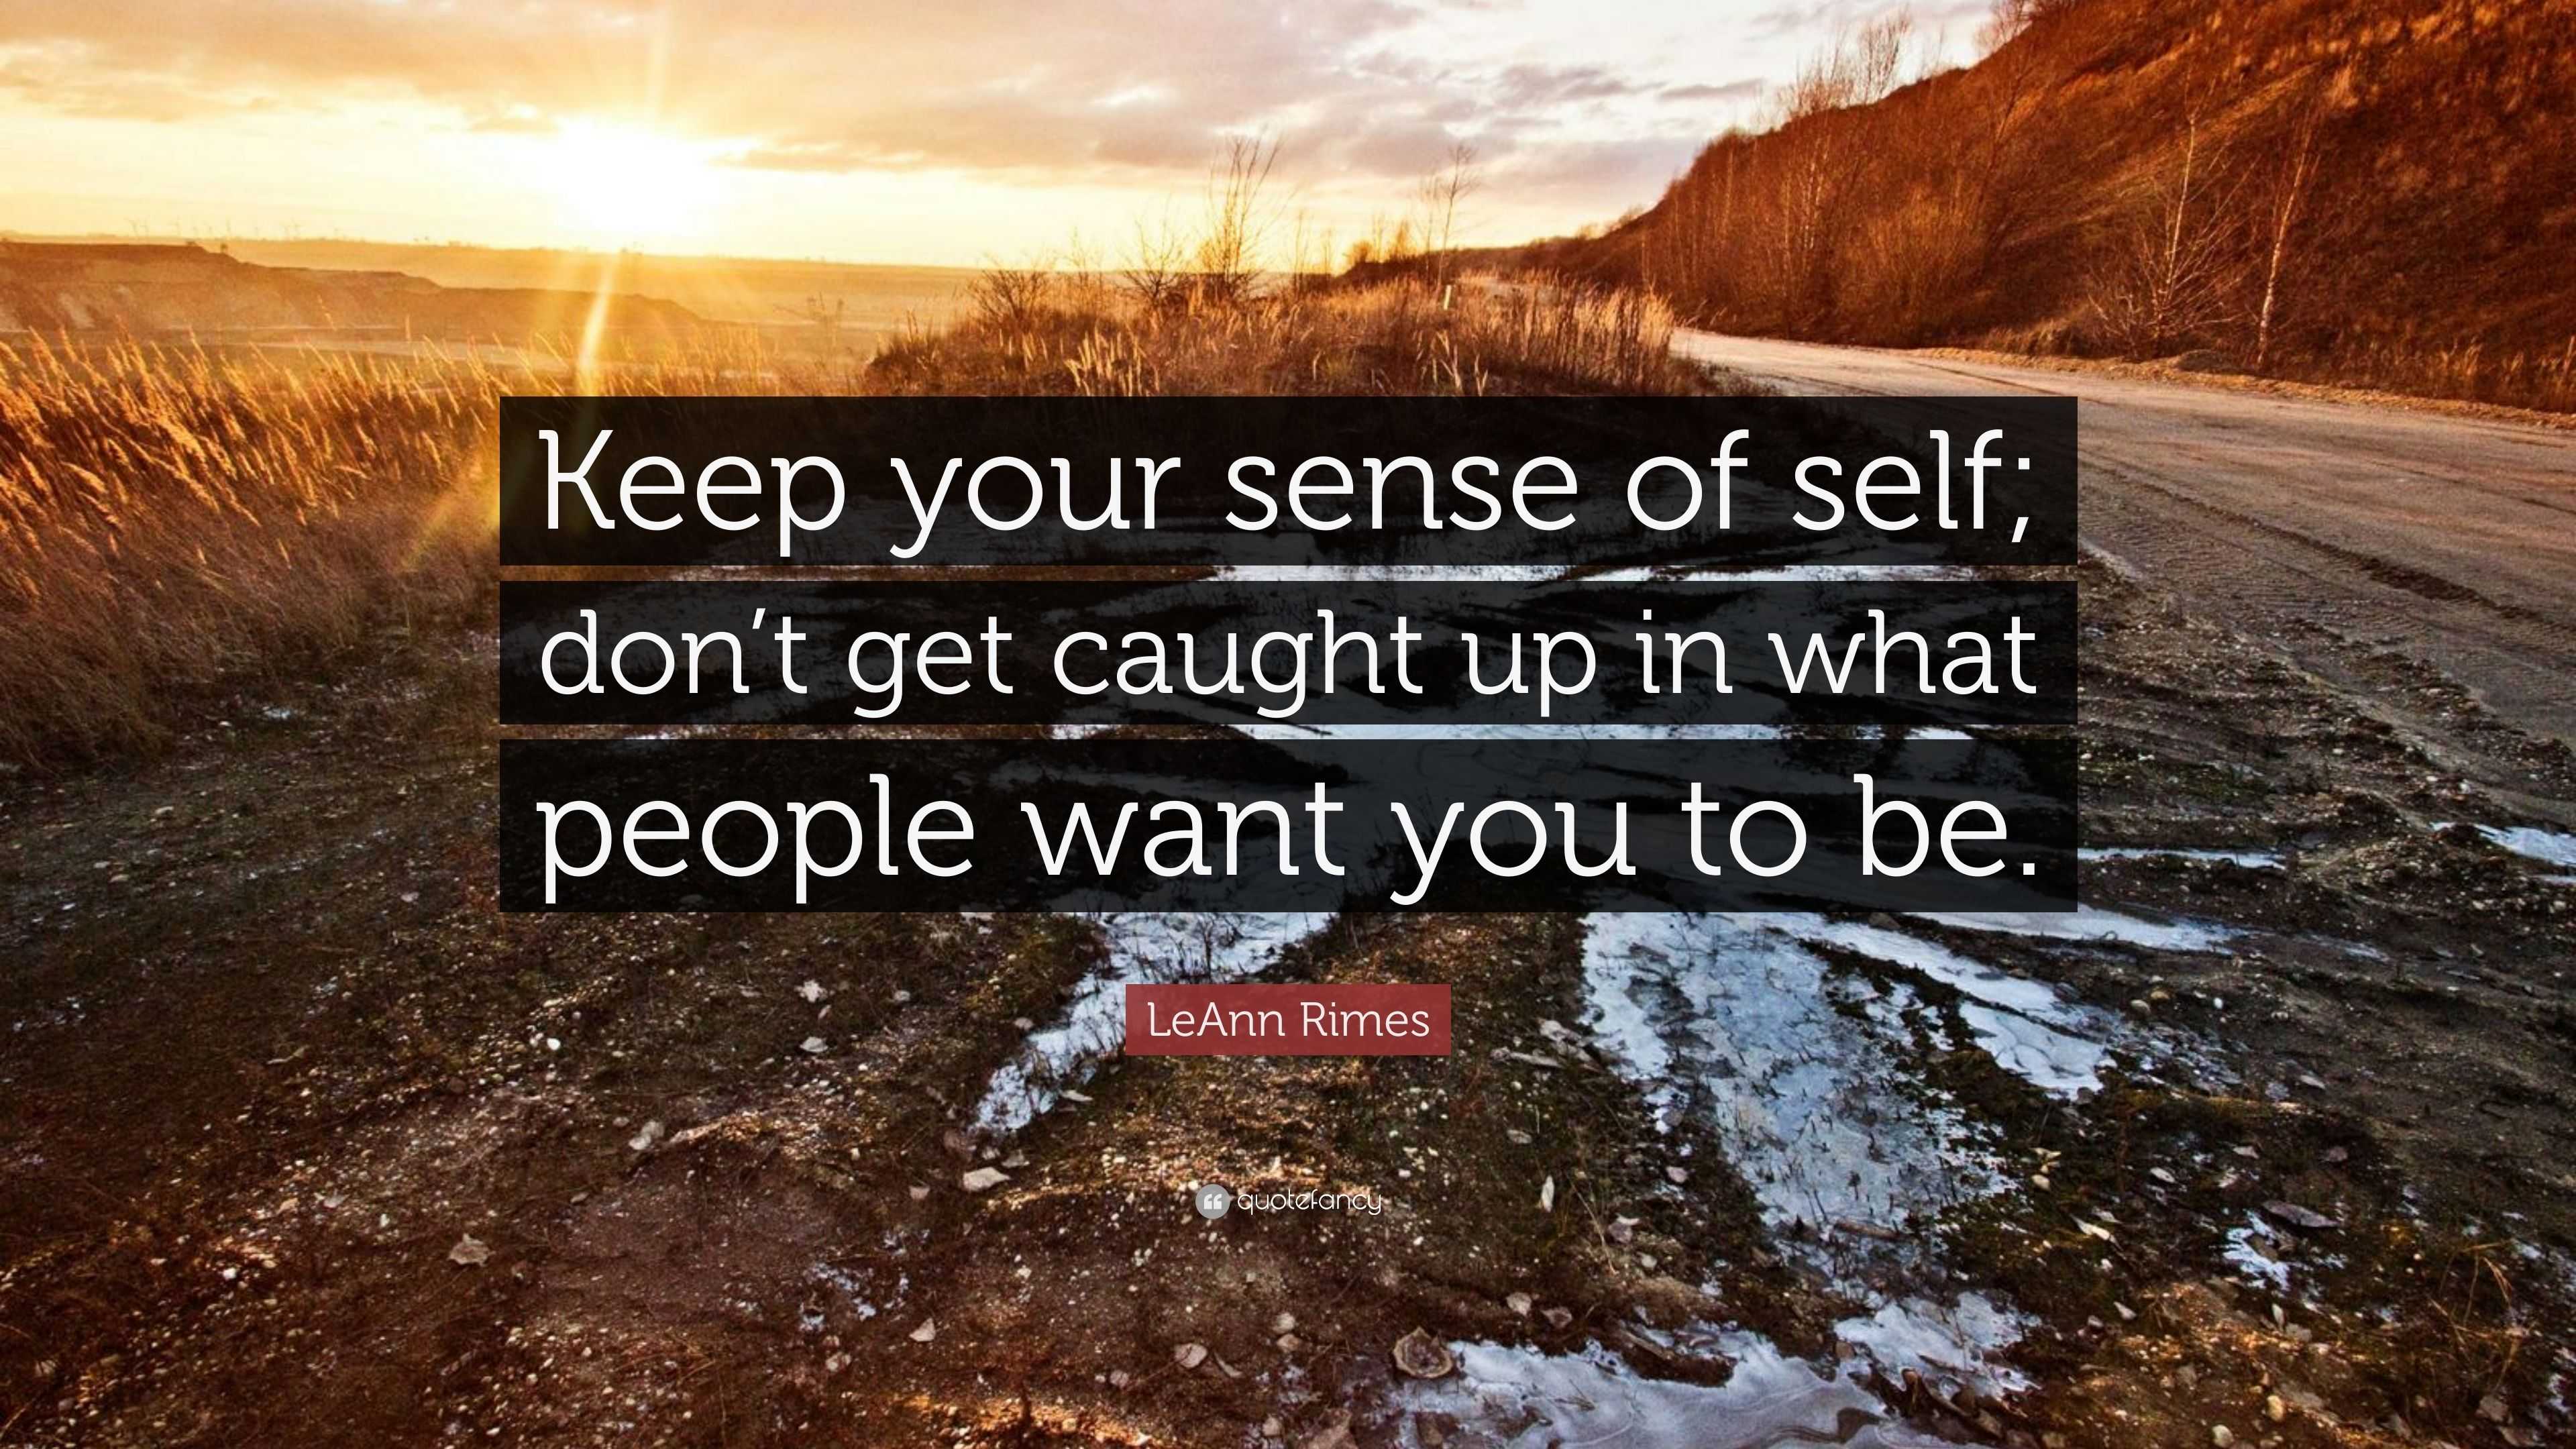 LeAnn Rimes Quote: “Keep your sense of self; don’t get caught up in ...